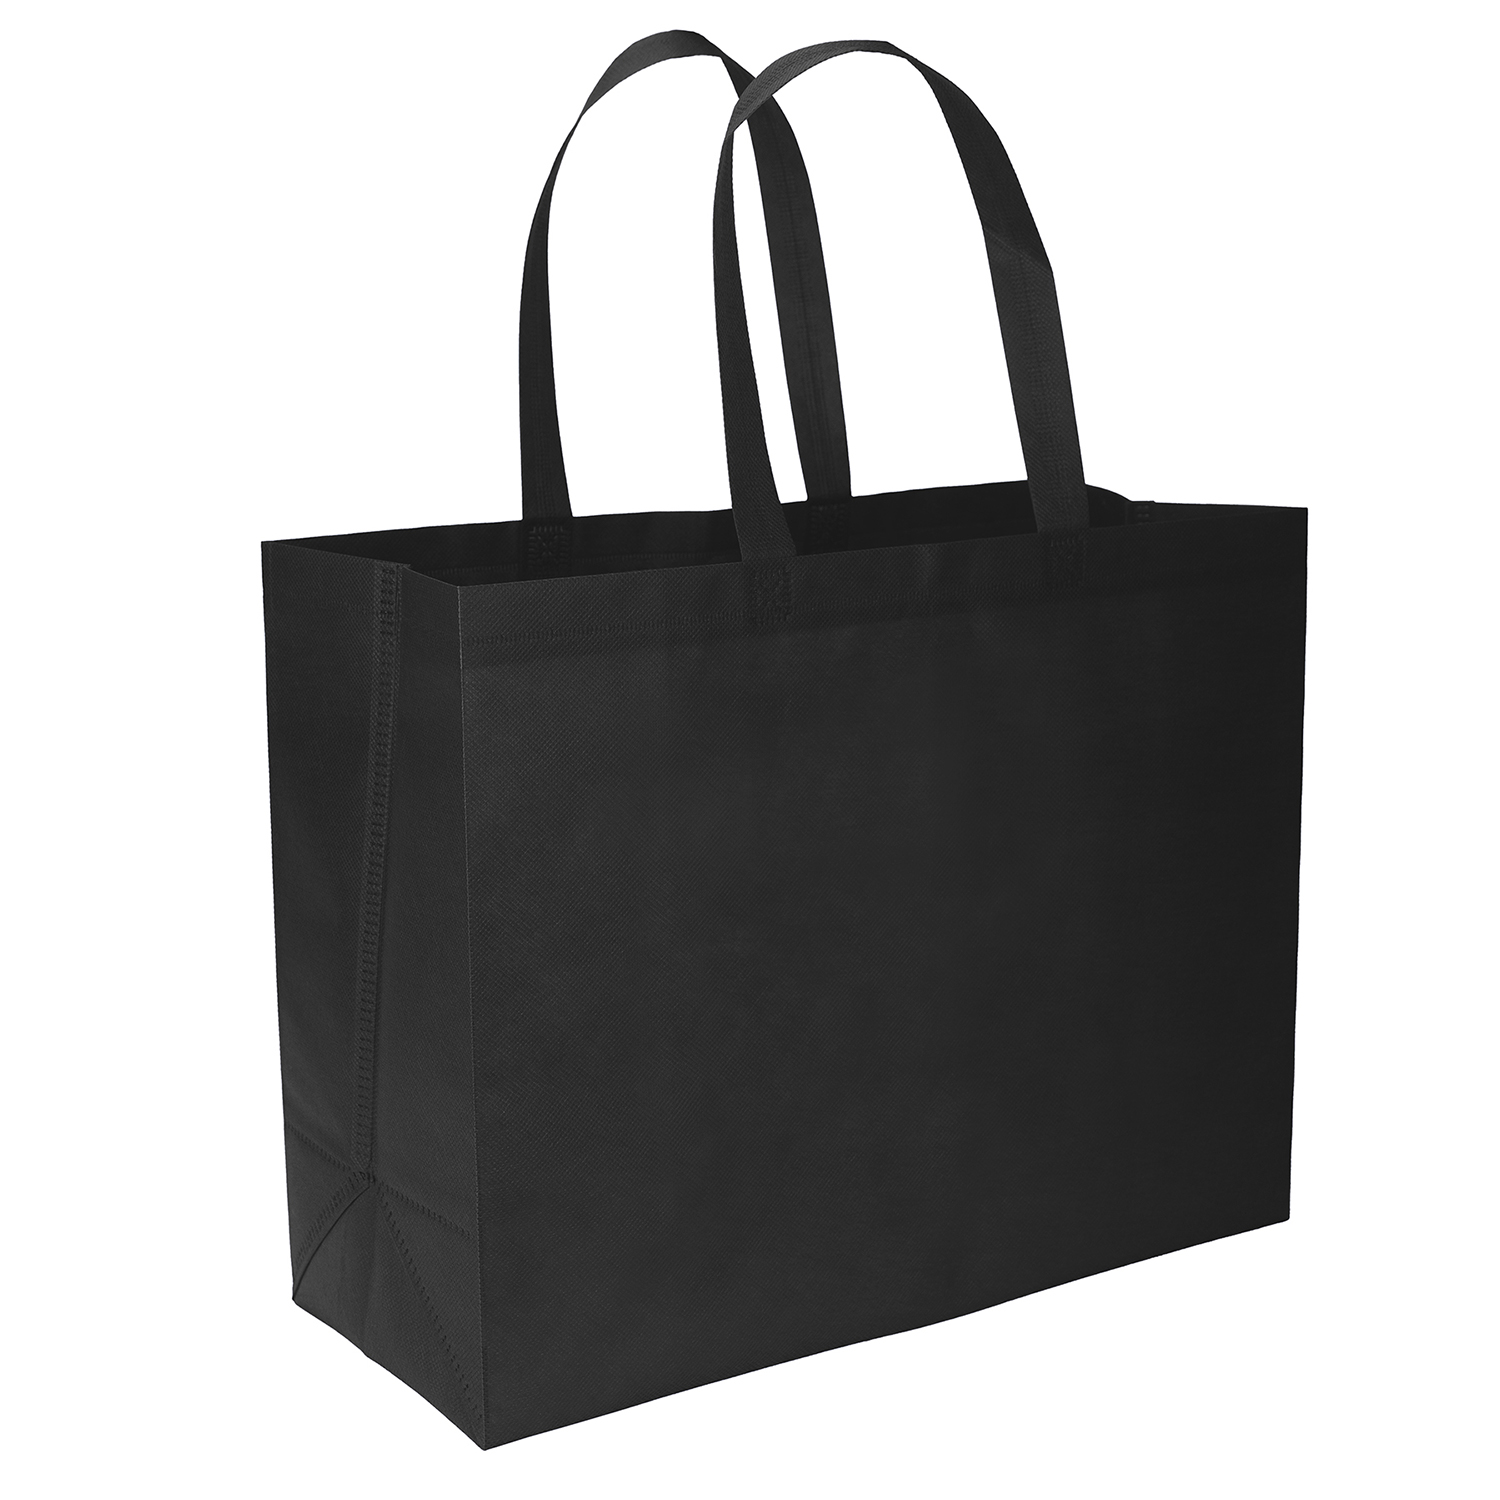 Bag Makers 39VA1915 - Custom Printed Promotional Non-Woven Value Budget Tote